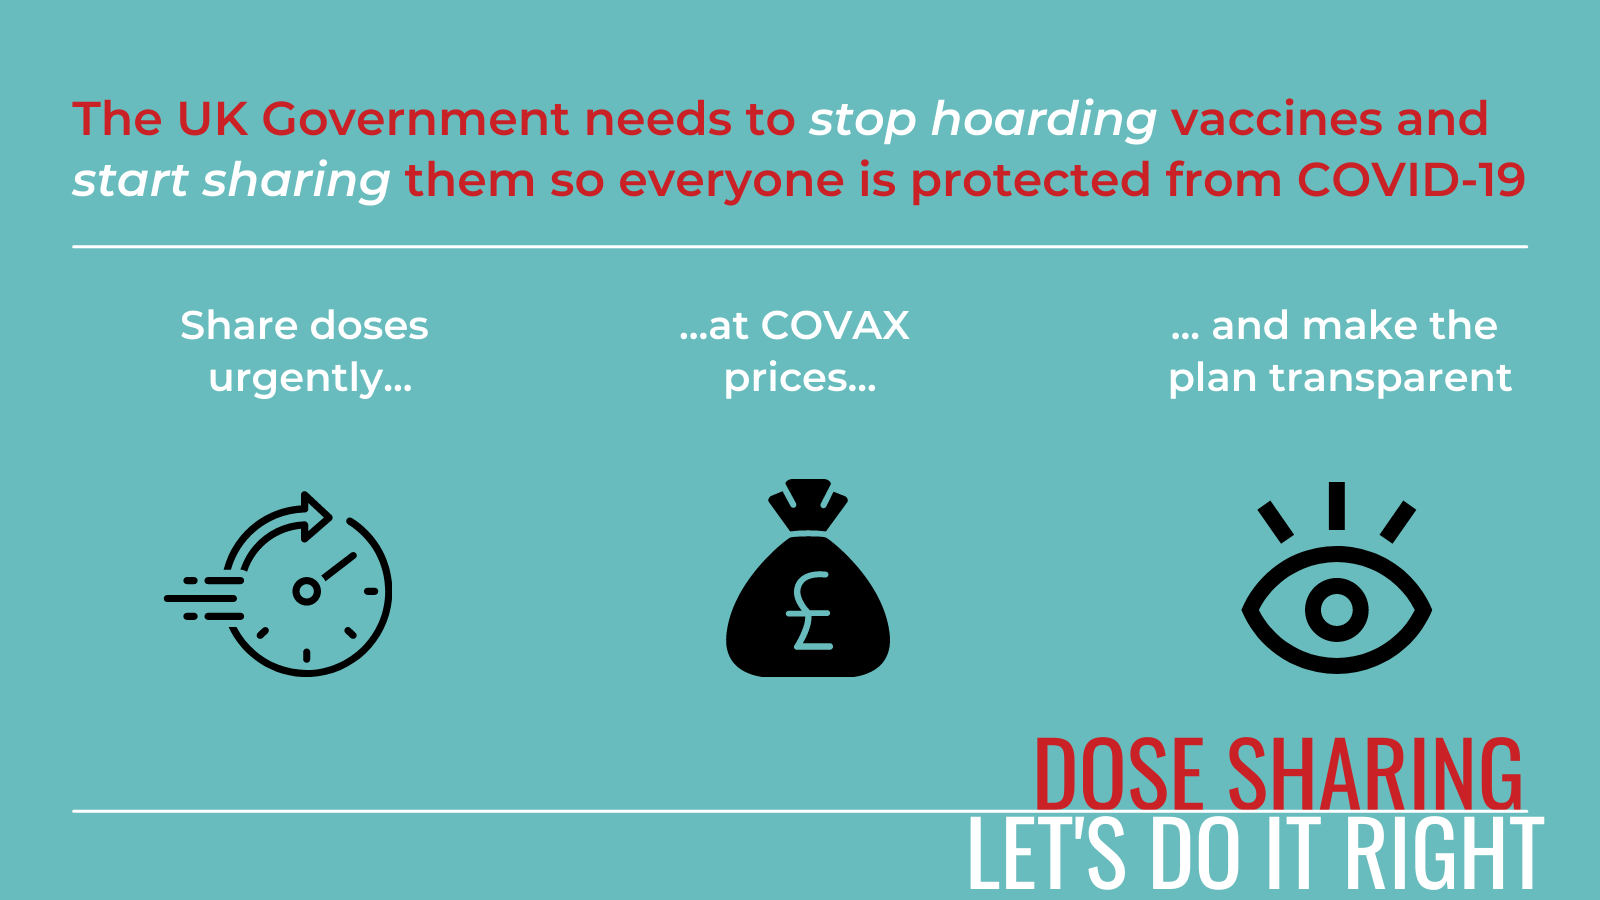 Graphic that reads "The UK Government need to stop hoarding vaccines and  start sharing them so everyone is protected from COVID-19. Share doses urgently... at COVAX prices... and make the plan transparent. Dose sharing, let's do it right.